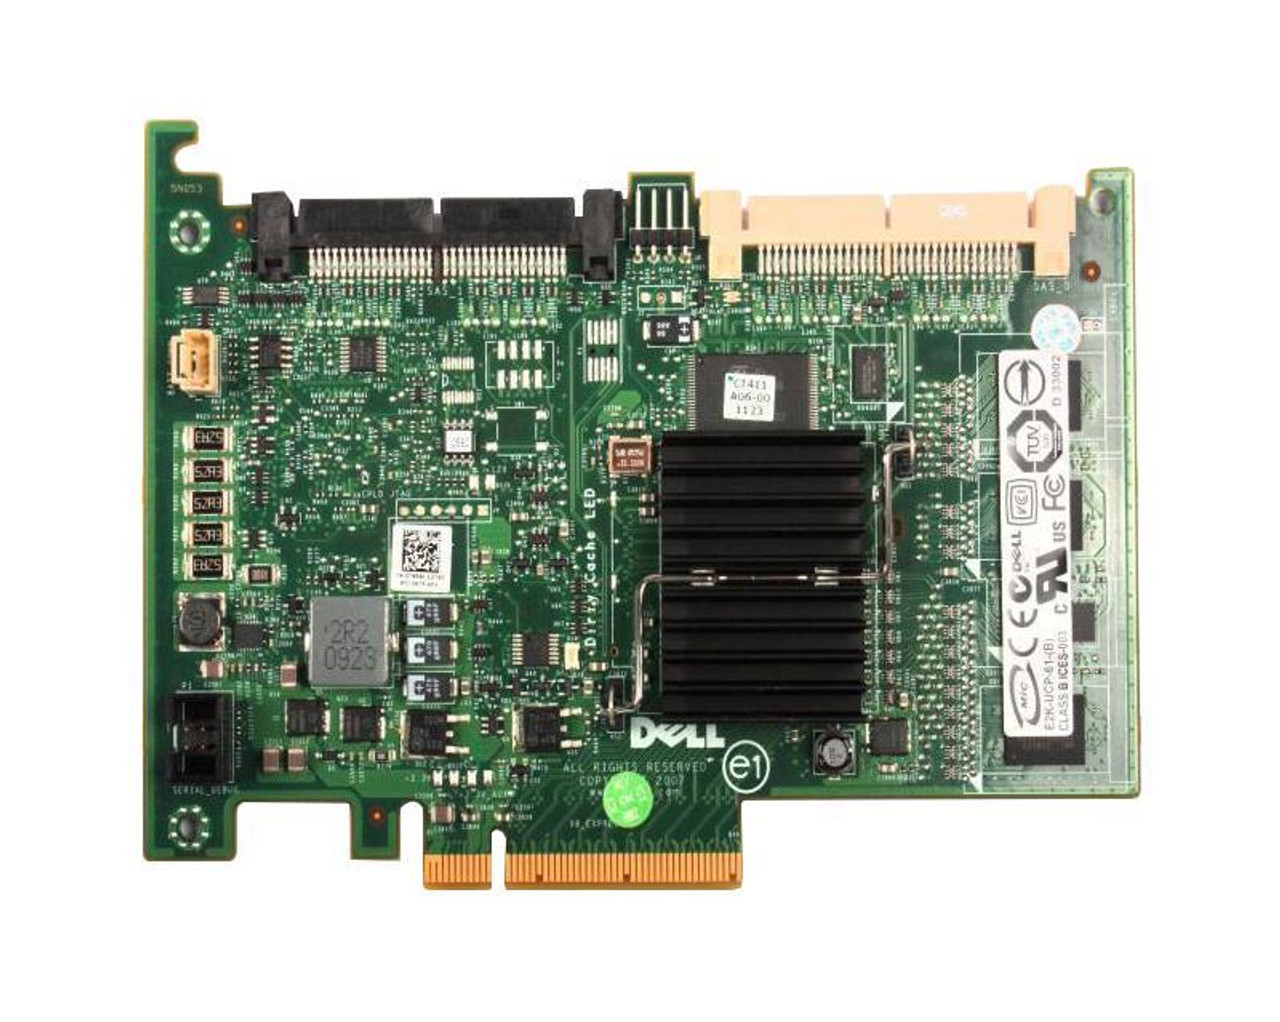 Dell PERC 6/i 256MB Cache Dual Channel SAS 3Gbps PCI Express 1.0 x8 Integrated RAID 0/1/5/6/10/50/60 Controller Card Mfr P/N 0T954JT954J